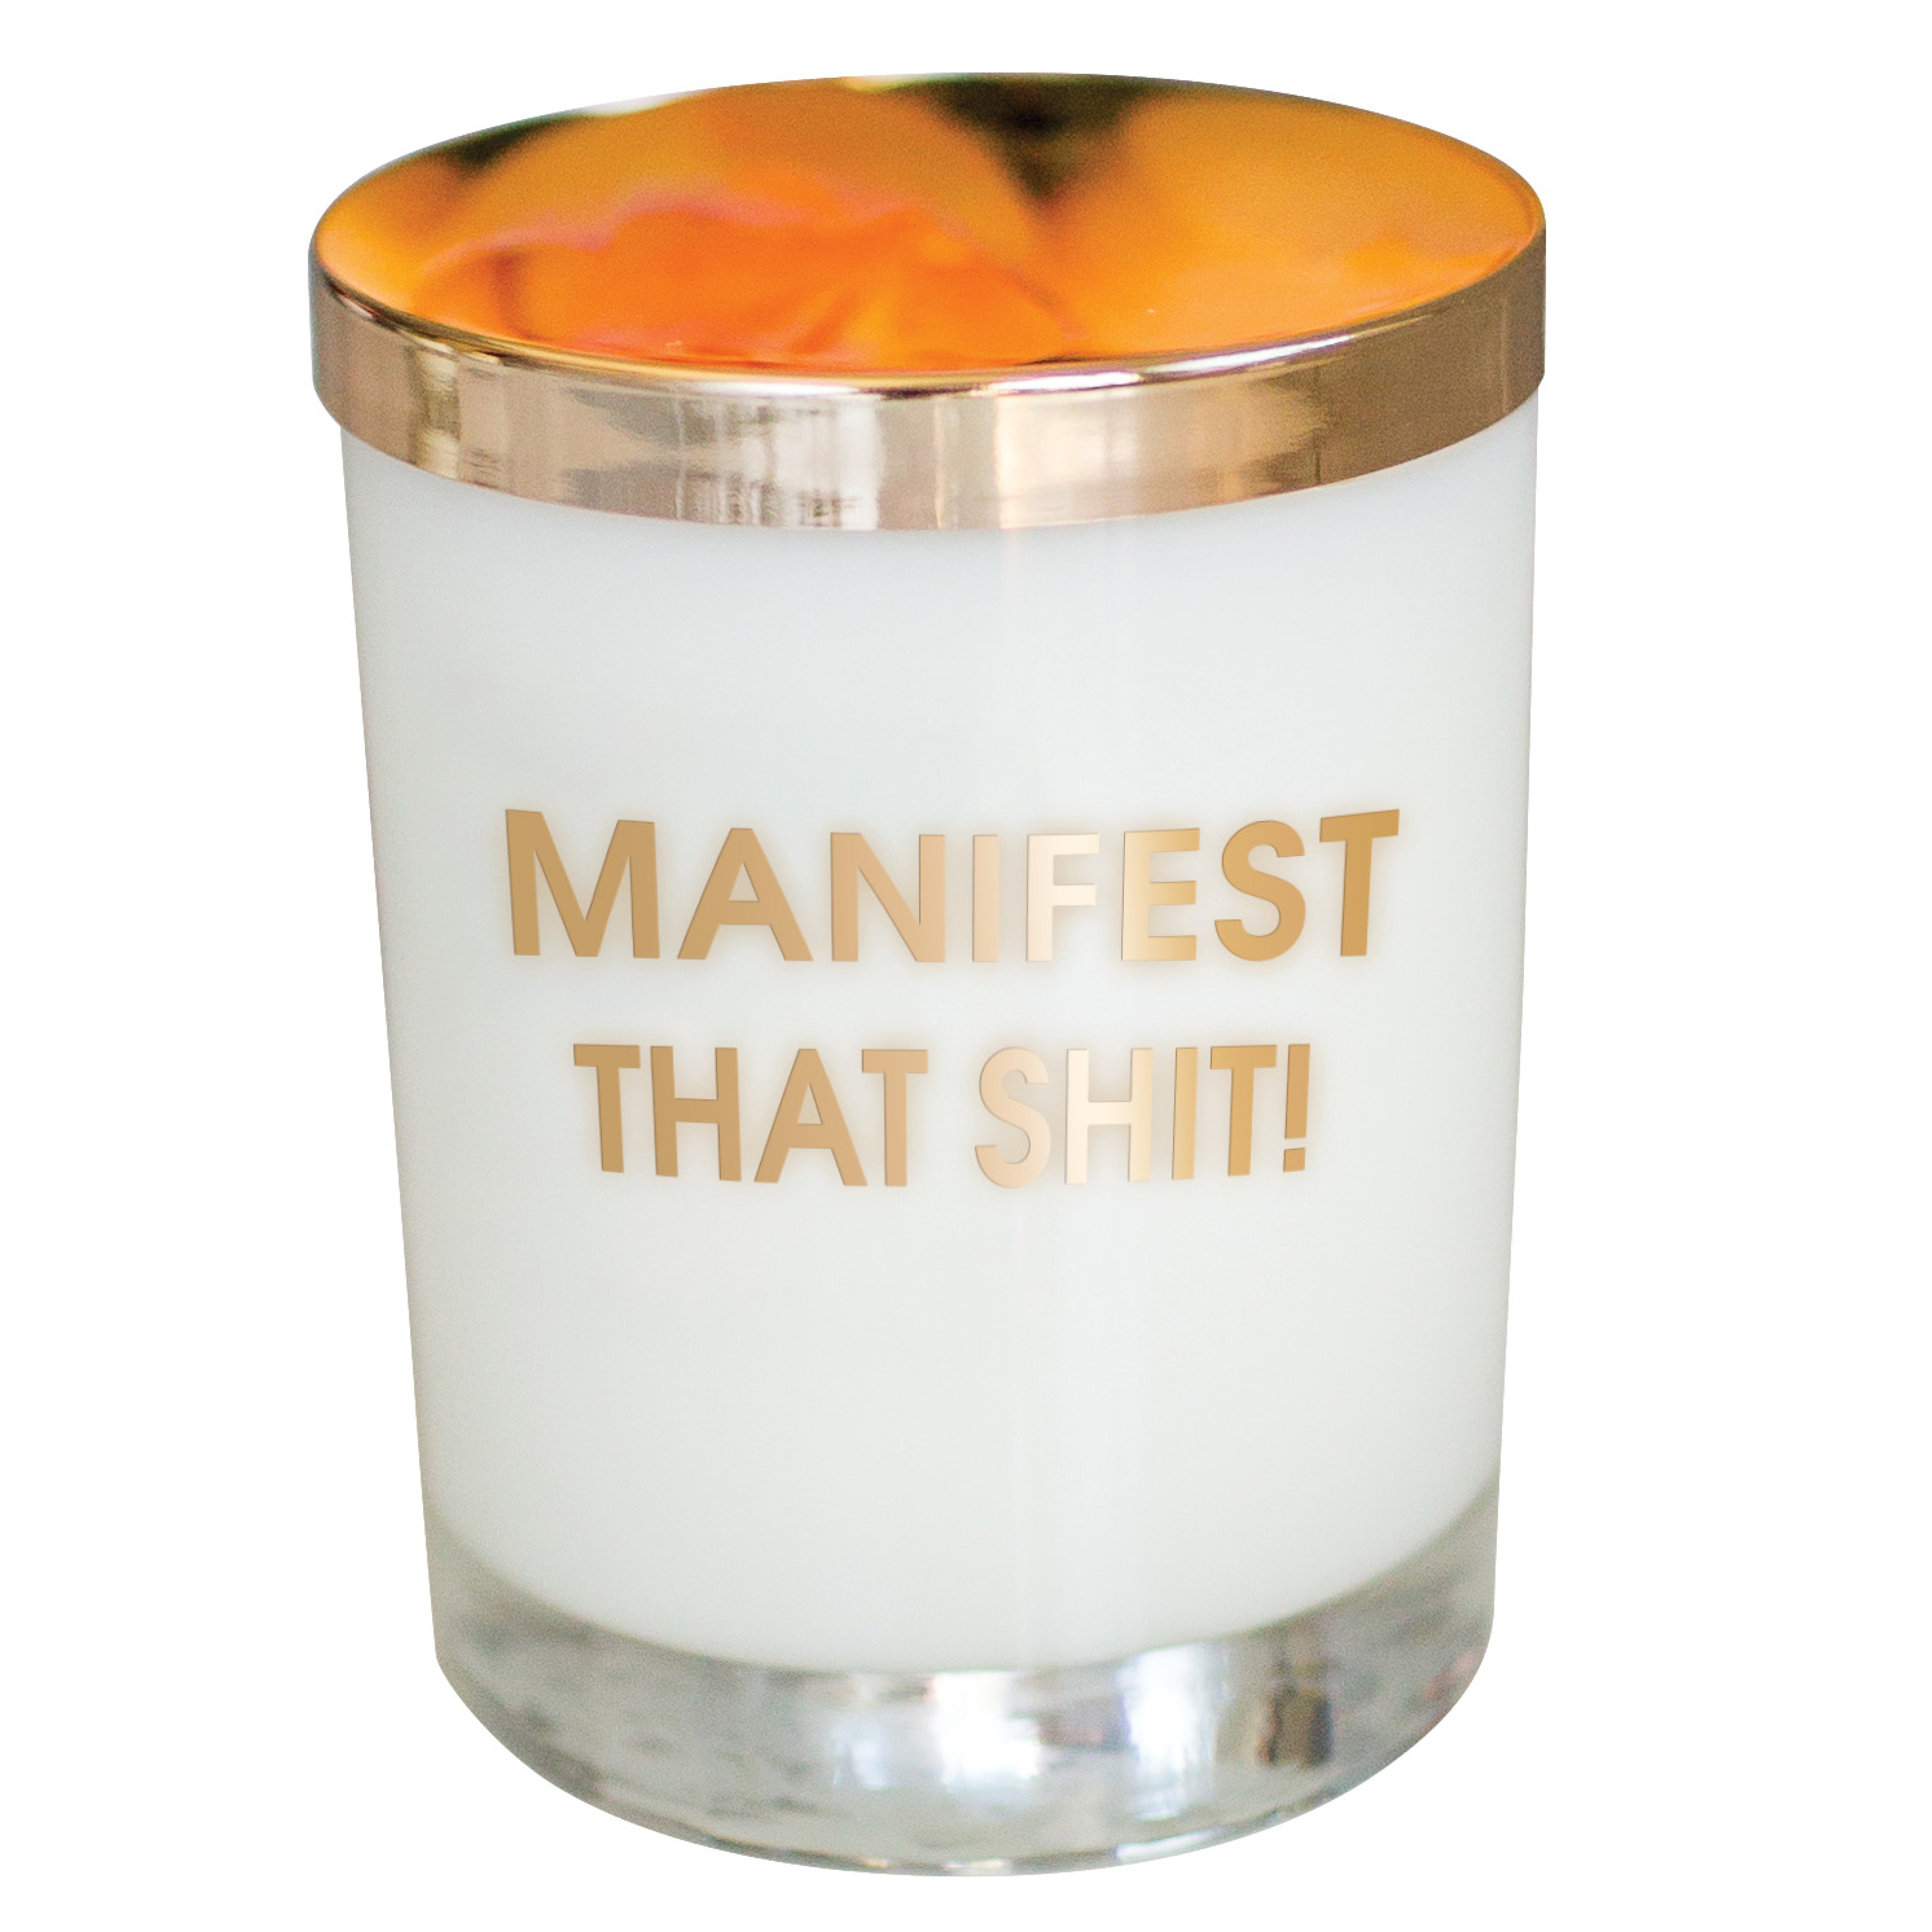 Manifest that Shit - Candle on the Rocks